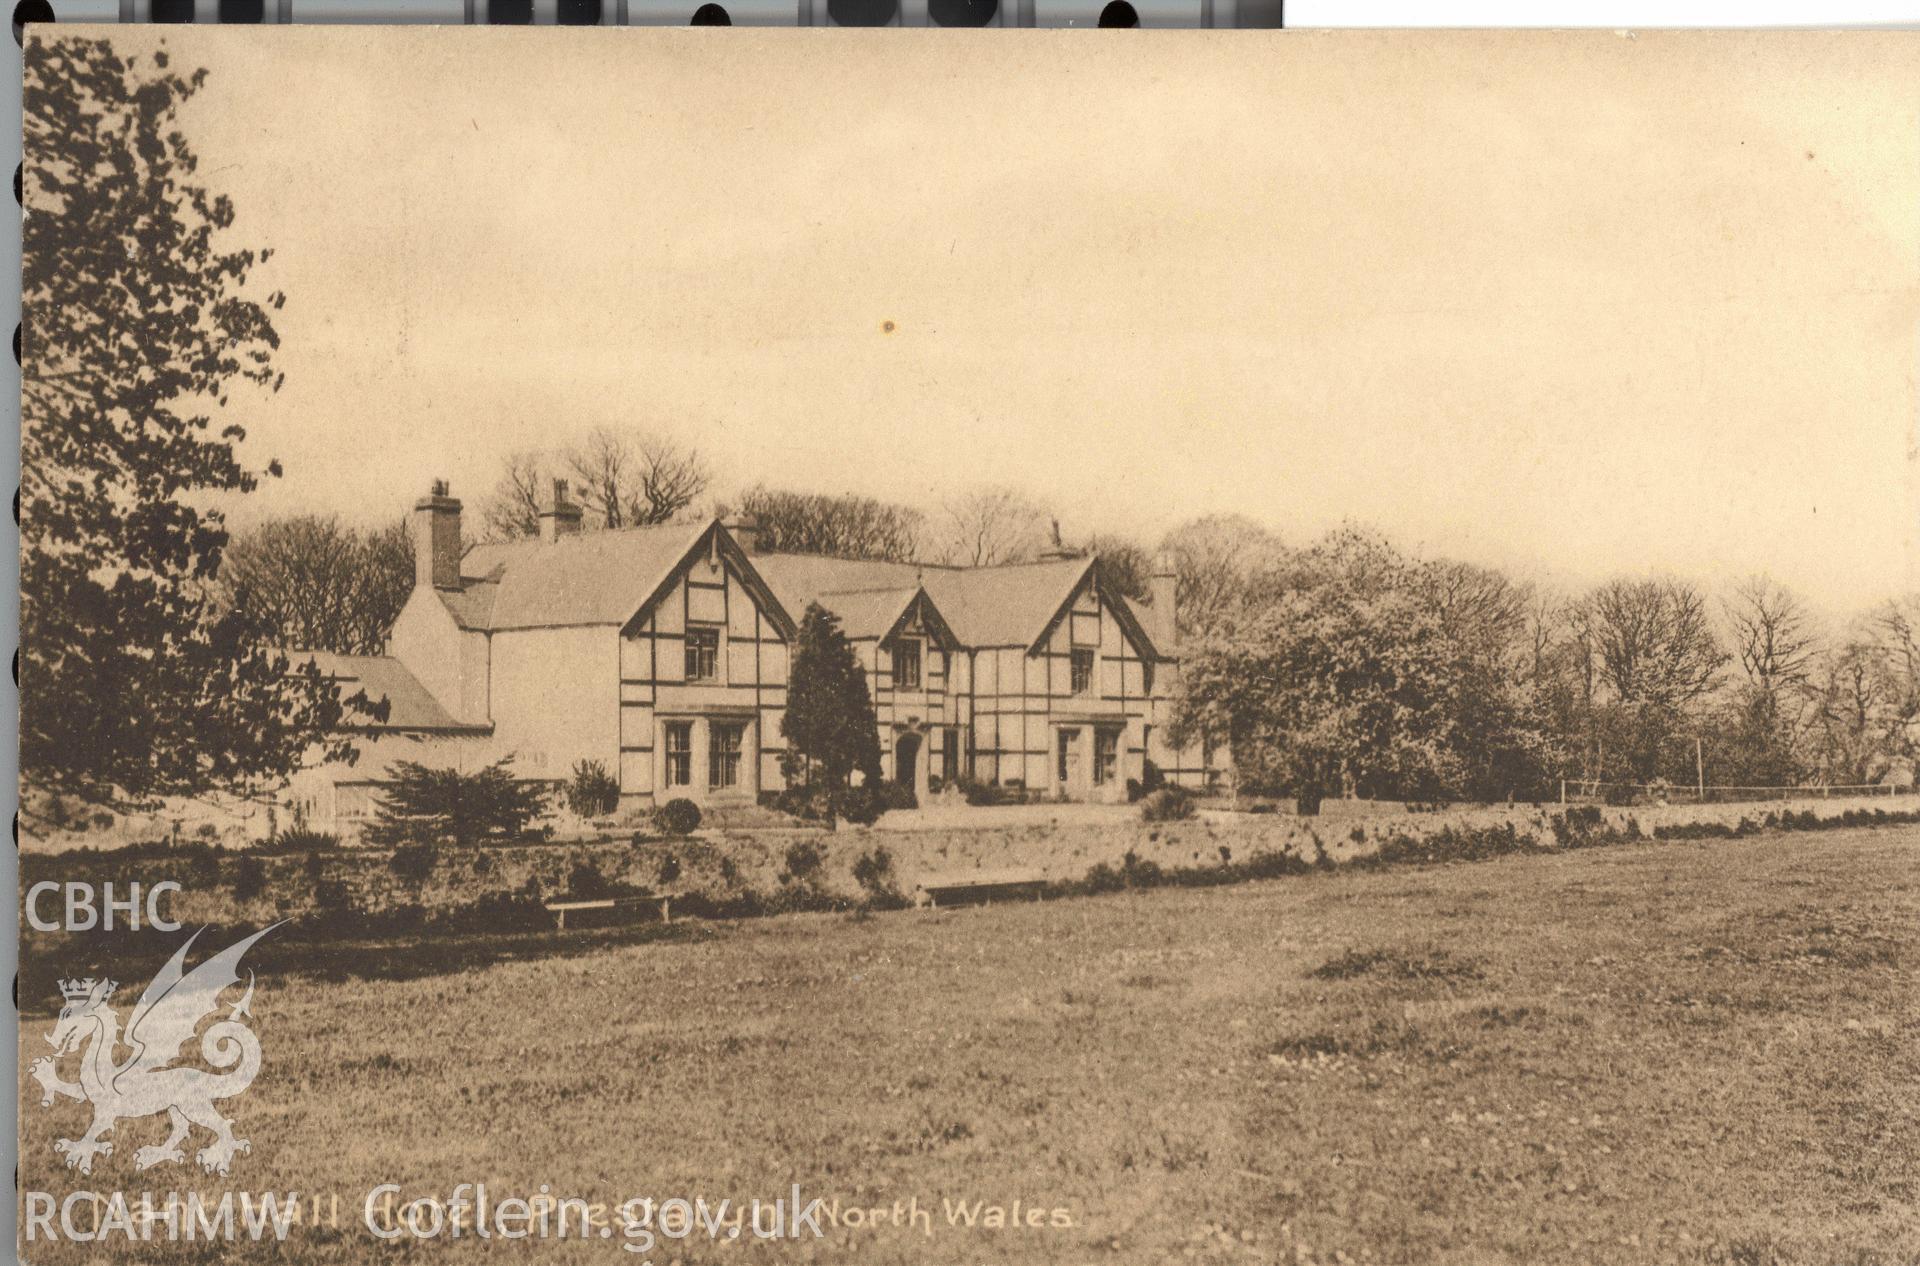 Digitised postcard image of Nant Hall Hotel, Prestatyn, Ed. J. Burrows & Co. Ltd., printers, Cheltenham. Produced by Parks and Gardens Data Services, from an original item in the Peter Davis Collection at Parks and Gardens UK. We hold only web-resolution images of this collection, suitable for viewing on screen and for research purposes only. We do not hold the original images, or publication quality scans.